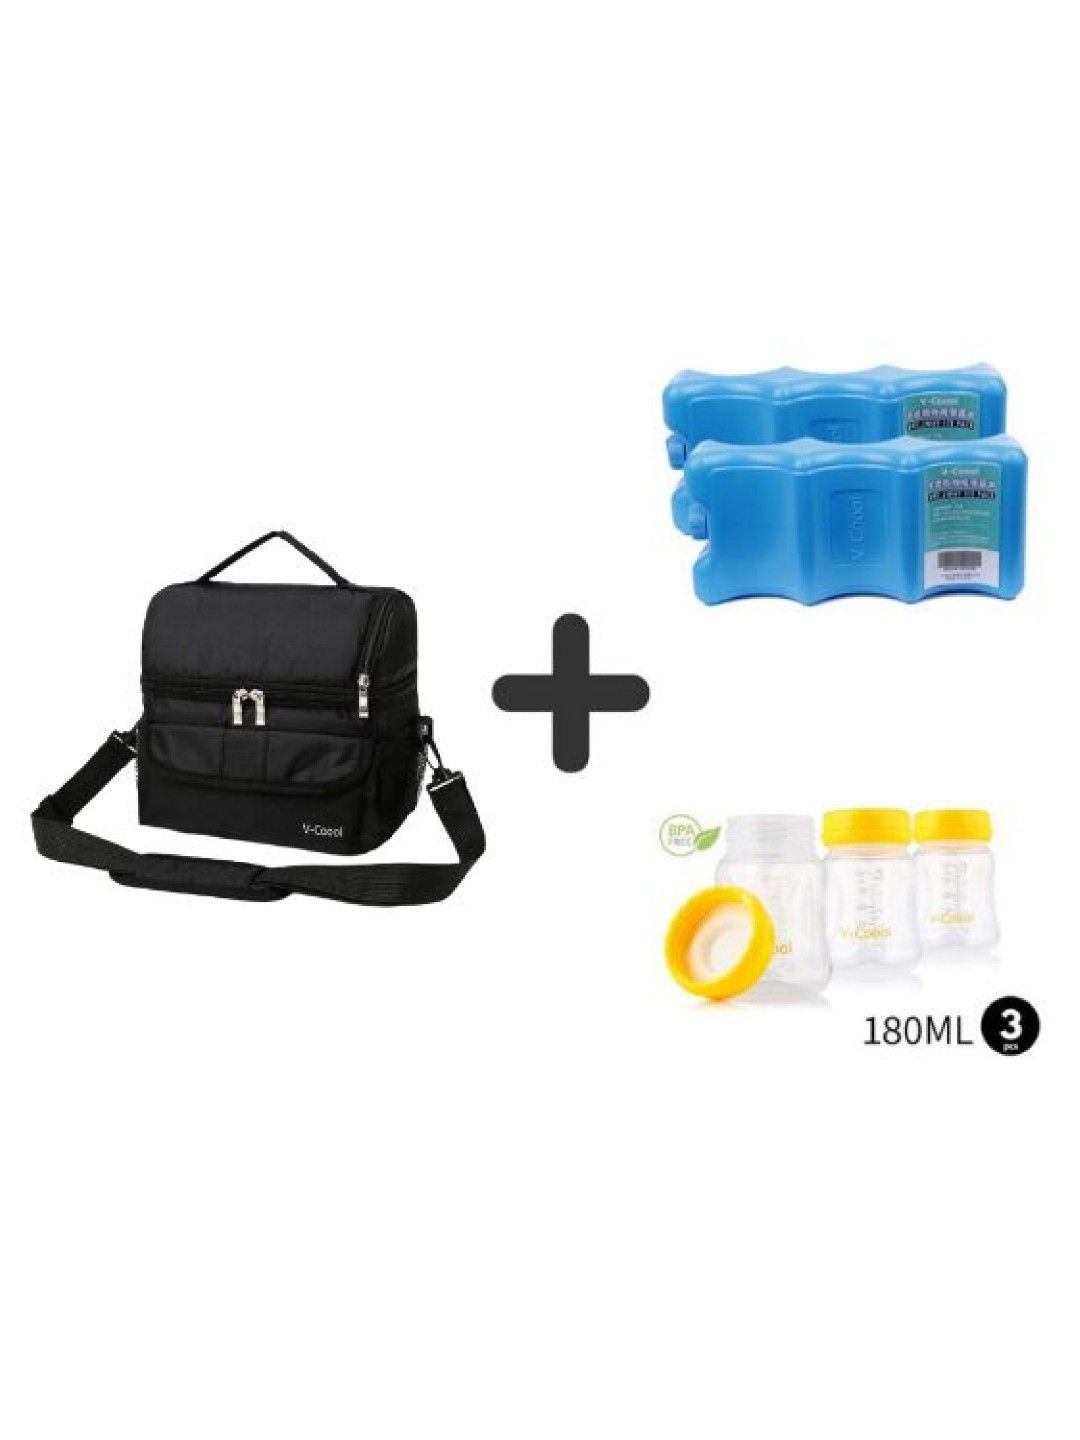 V-coool Thermal Cooler Tote Insulated Bag with Ice Bricks & Bottles